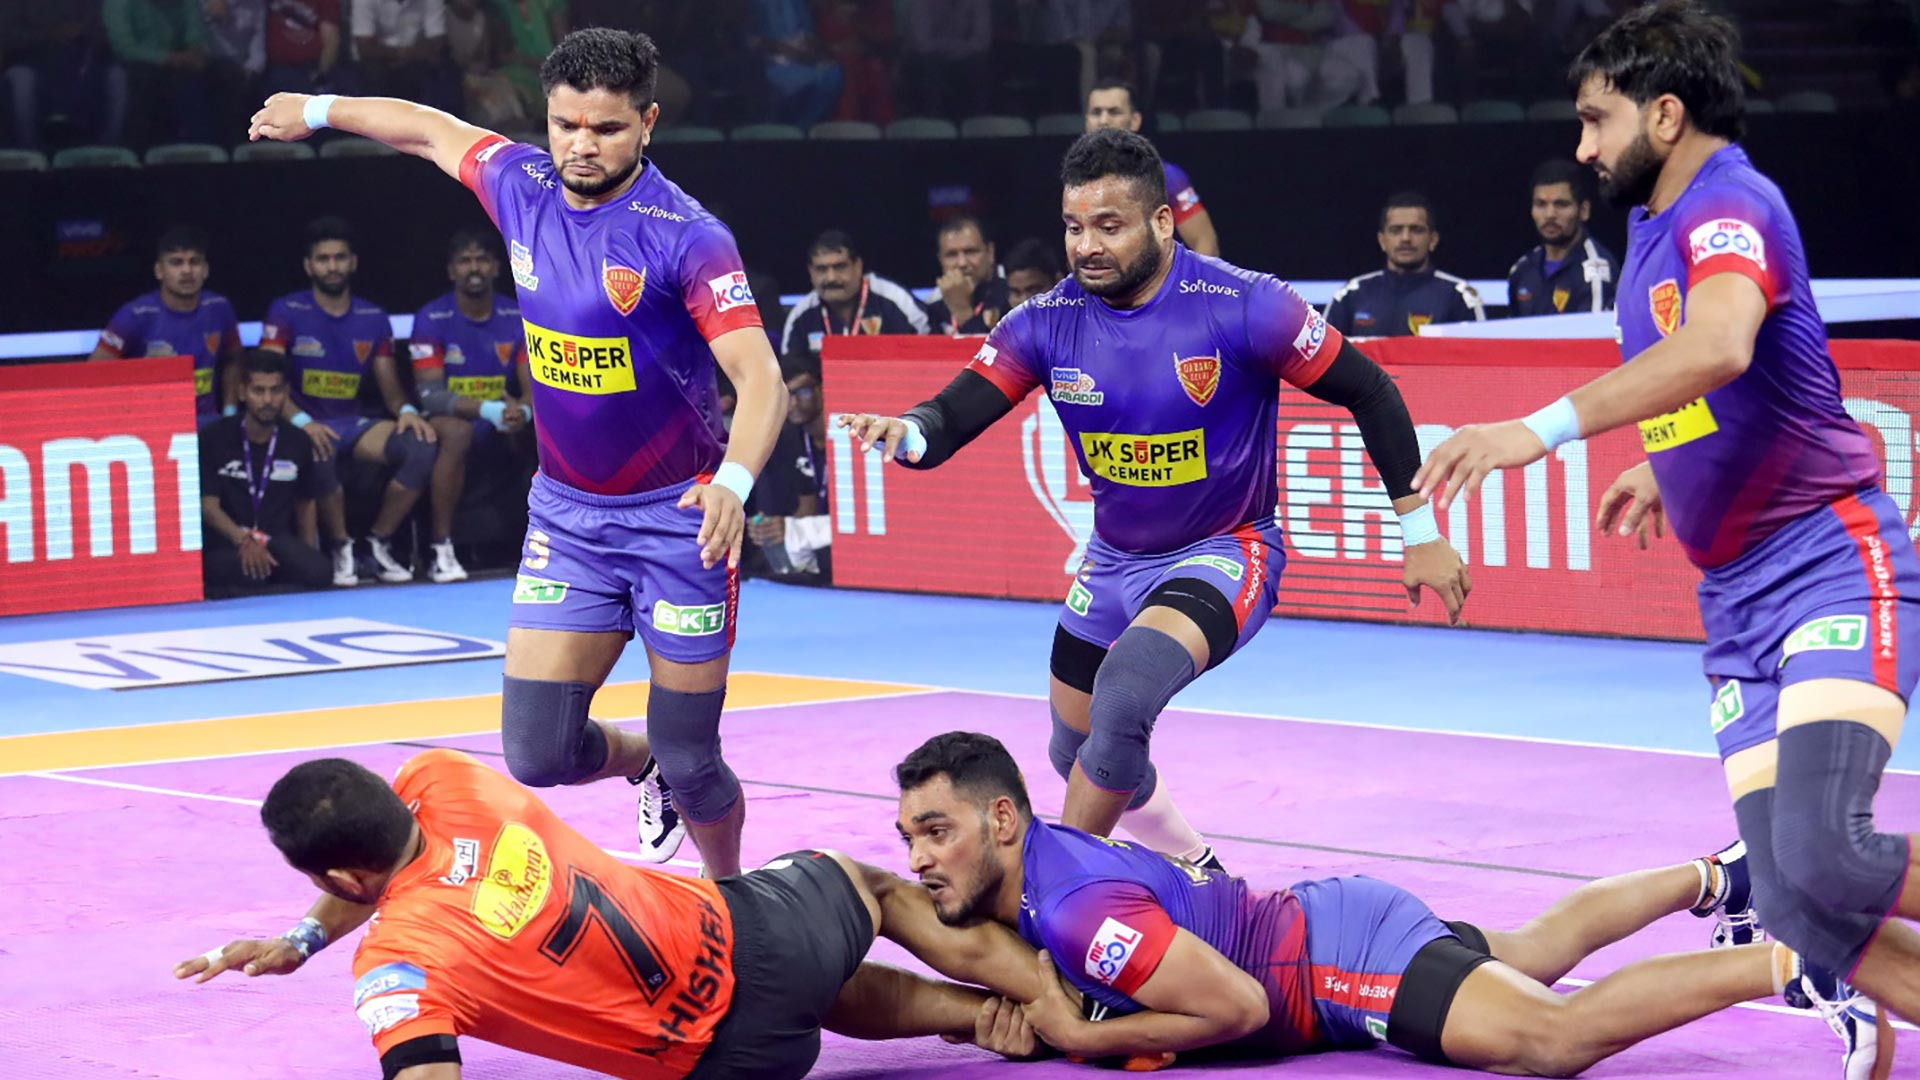 PKL 2019 | First time at the top - Dabang Delhi’s journey of complete transformation